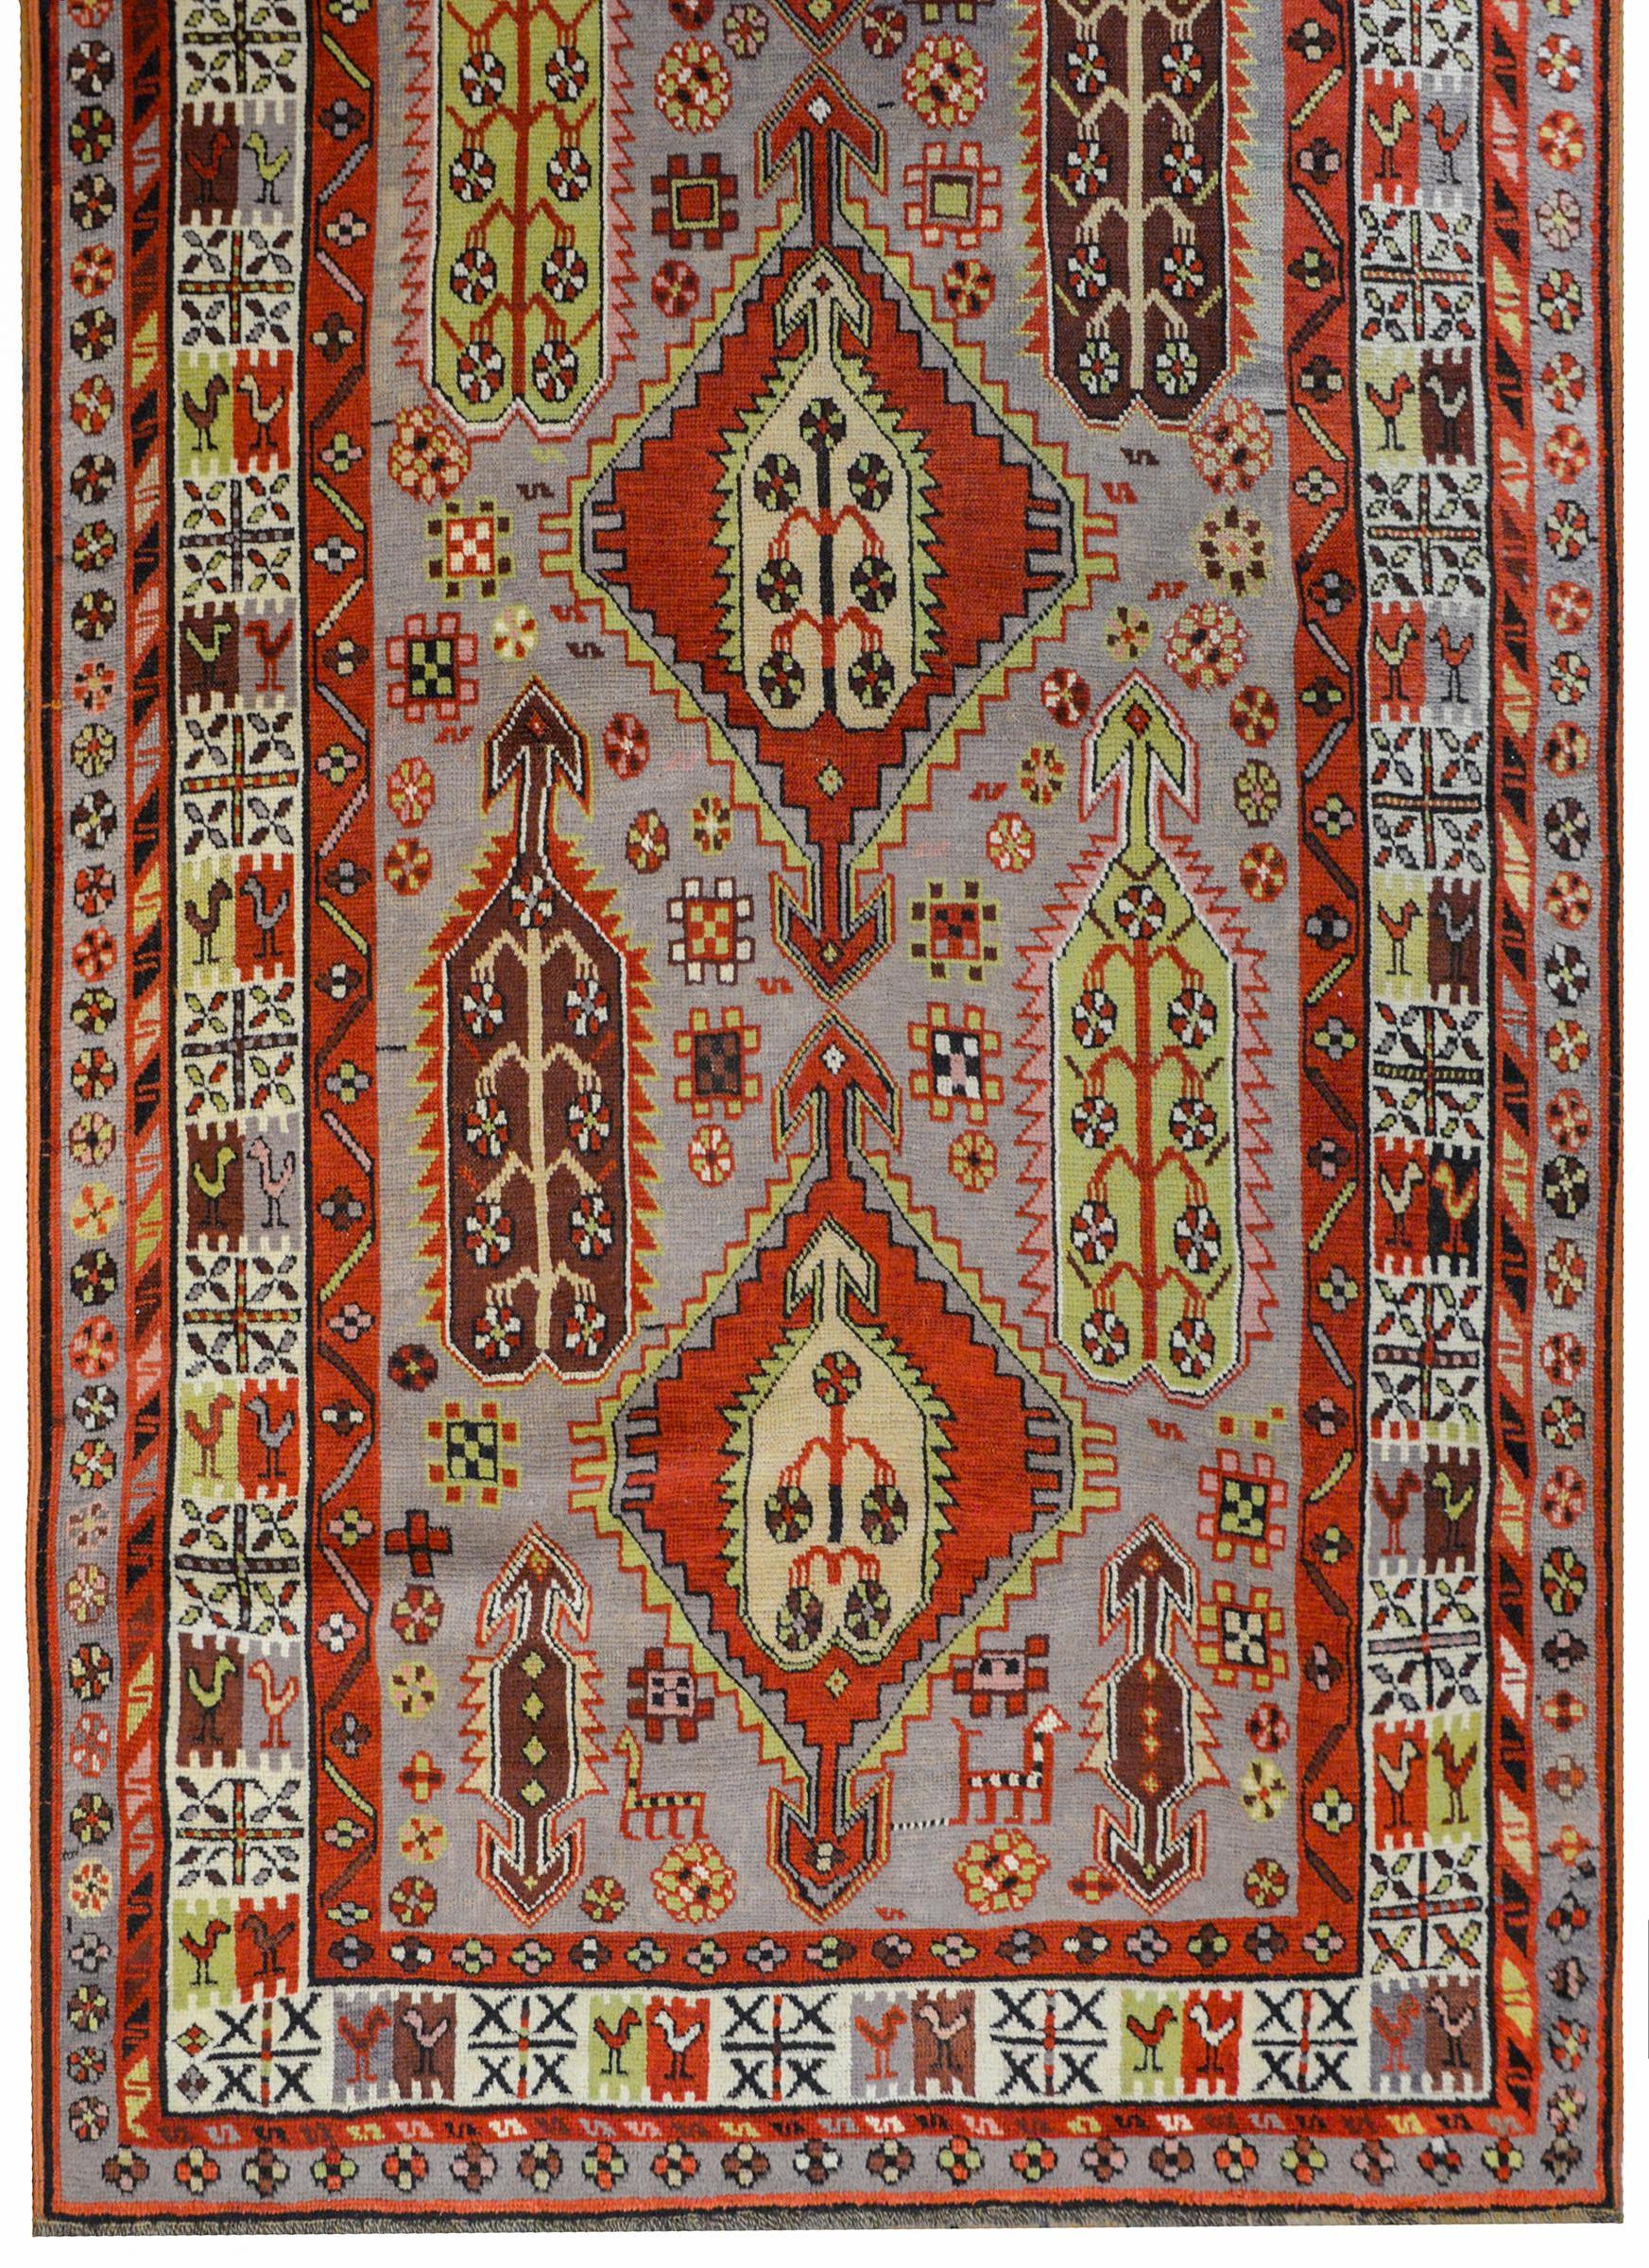 An outstanding early 20th century Karebak rug with a beautiful all-over large-scale abstract paisley pattern woven in coral, pale green, pink, white, and black, amidst a field of stylized flowers woven in similar colors, all on a pale lavender